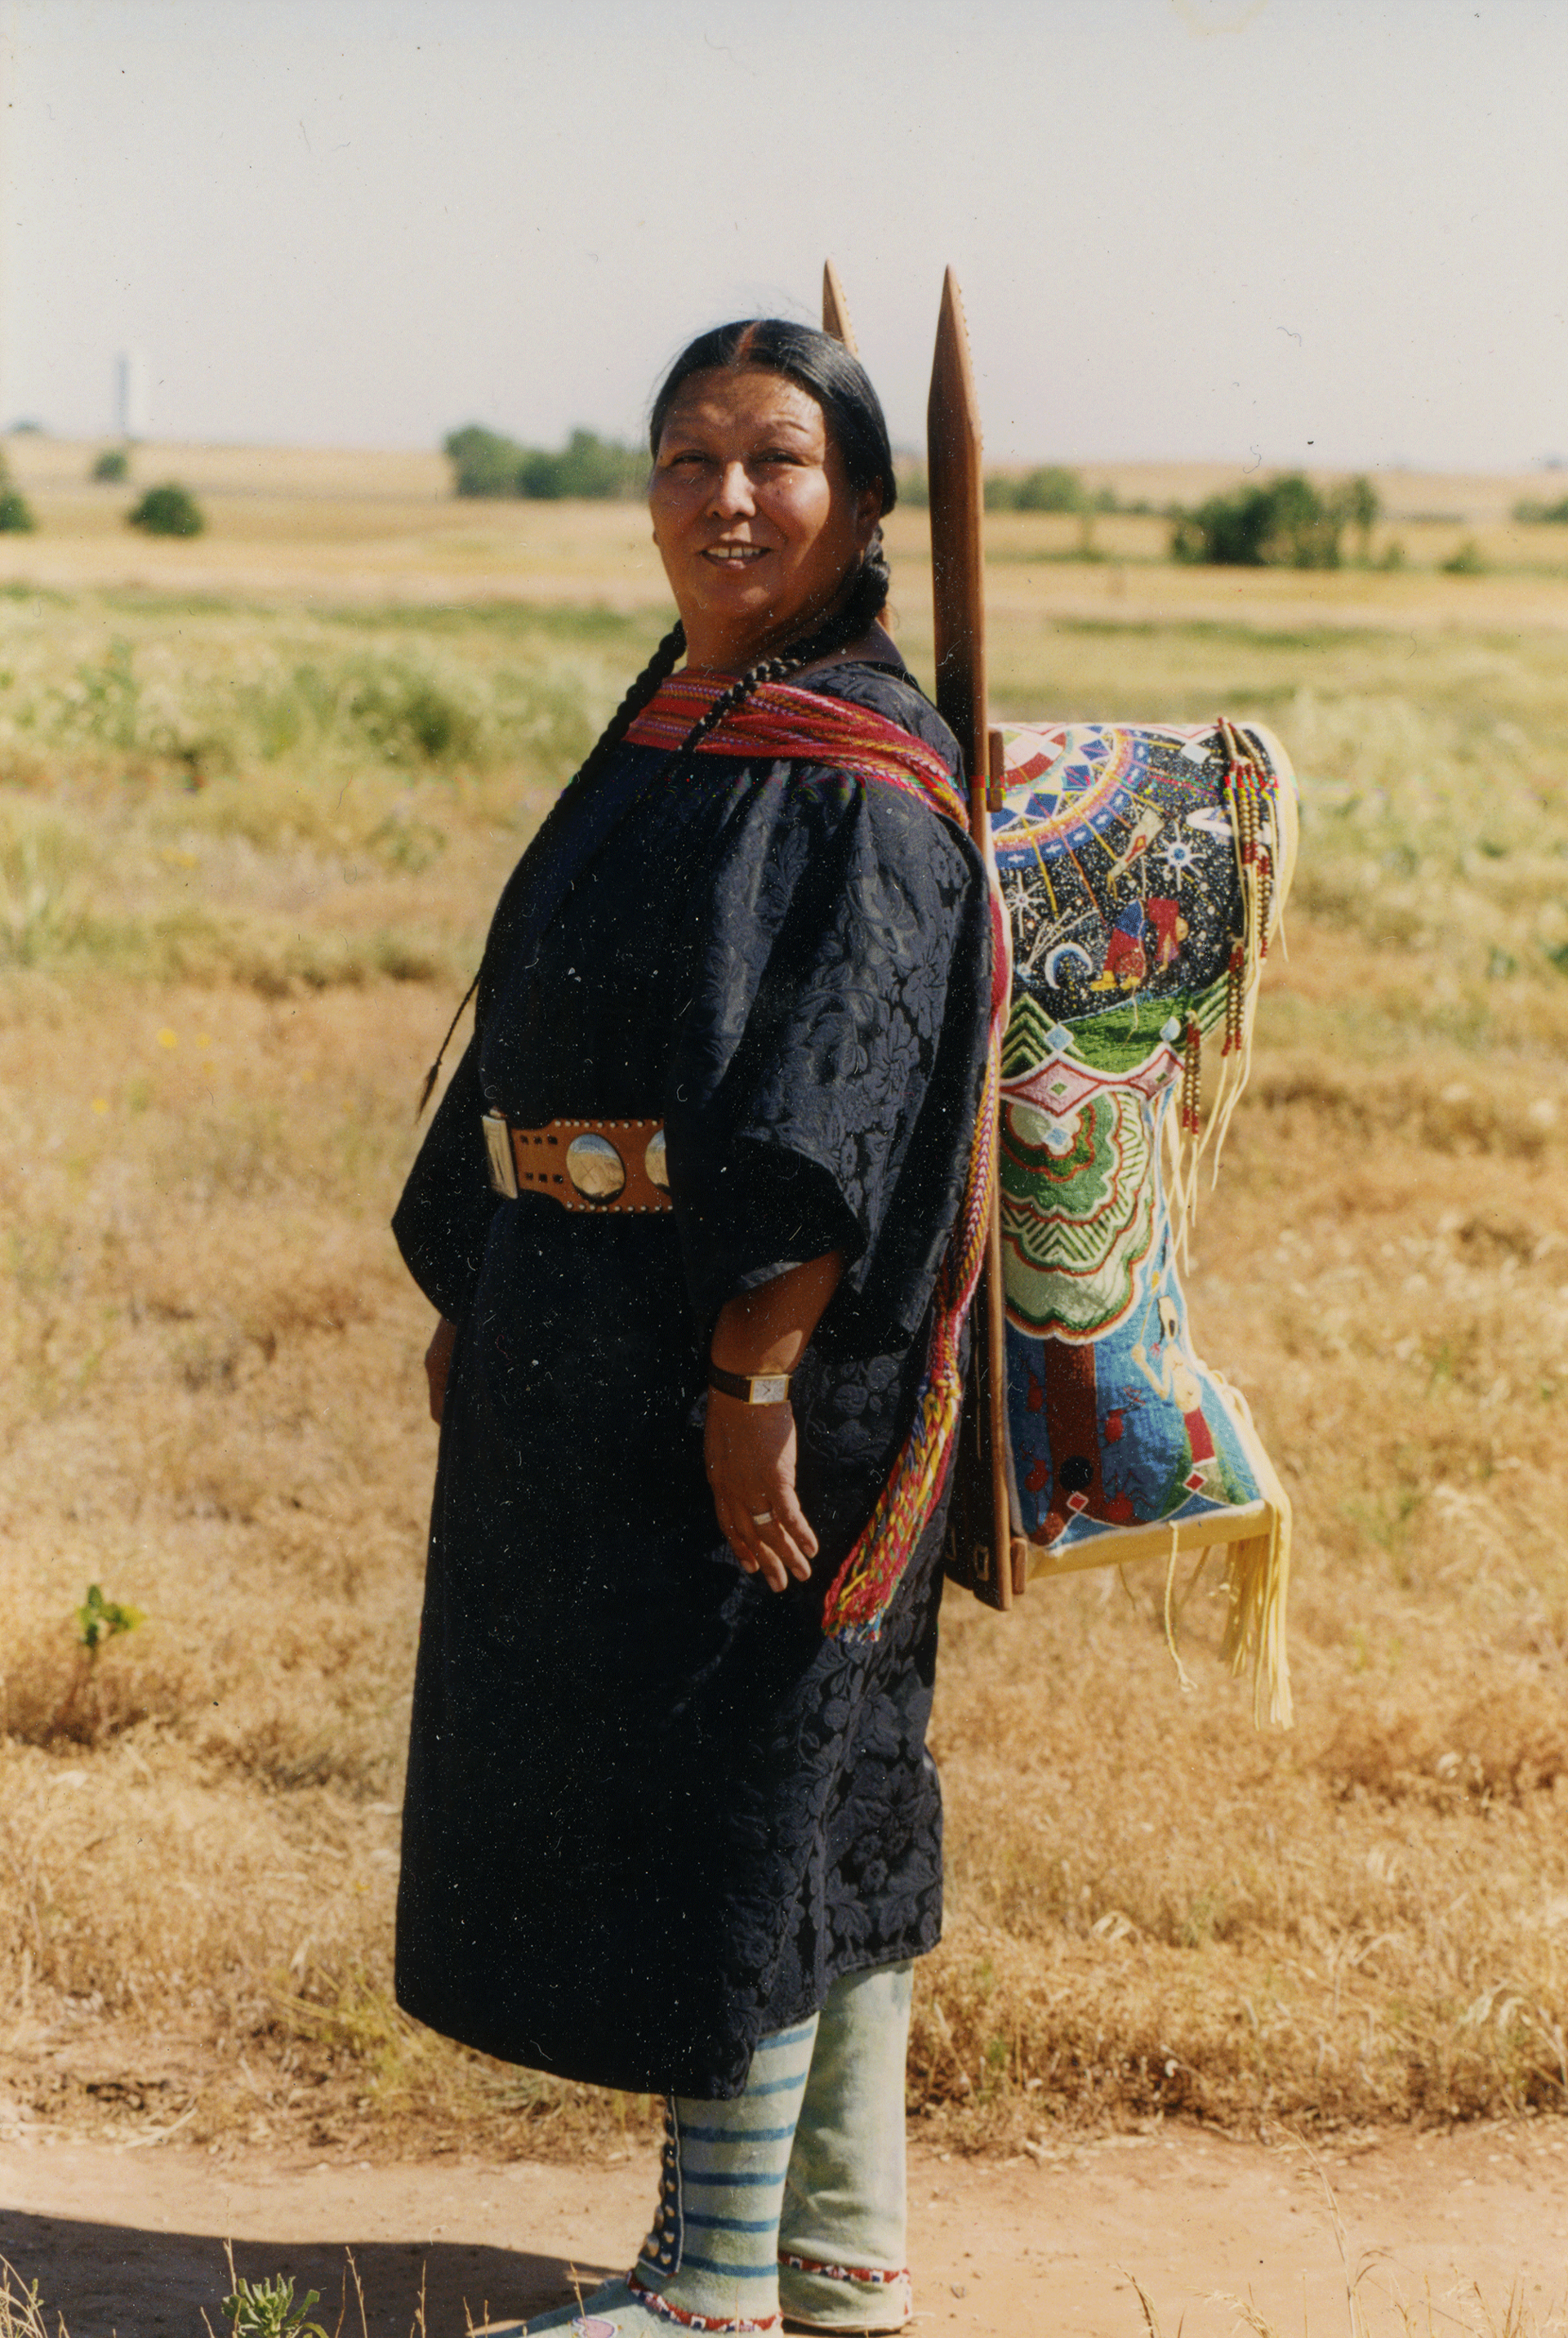 Brown-skinned woman wearing a colorful baby carrier strapped to her back. Her hair is braided and she wears a dark dress and striped socks.